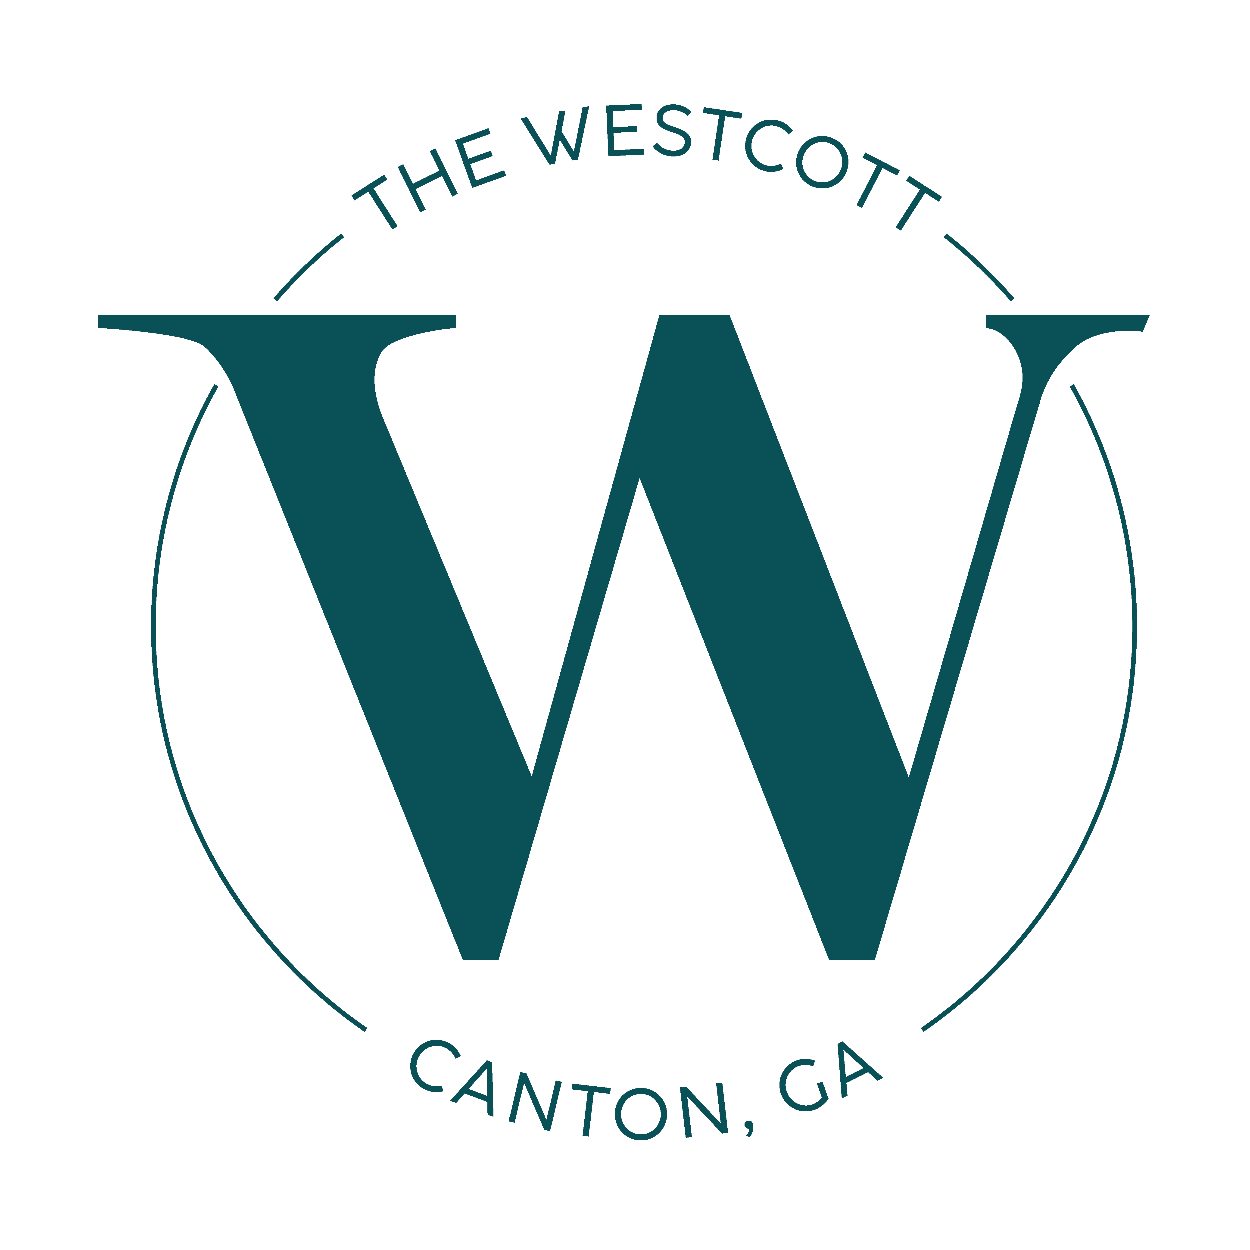 The Westcott at Canton